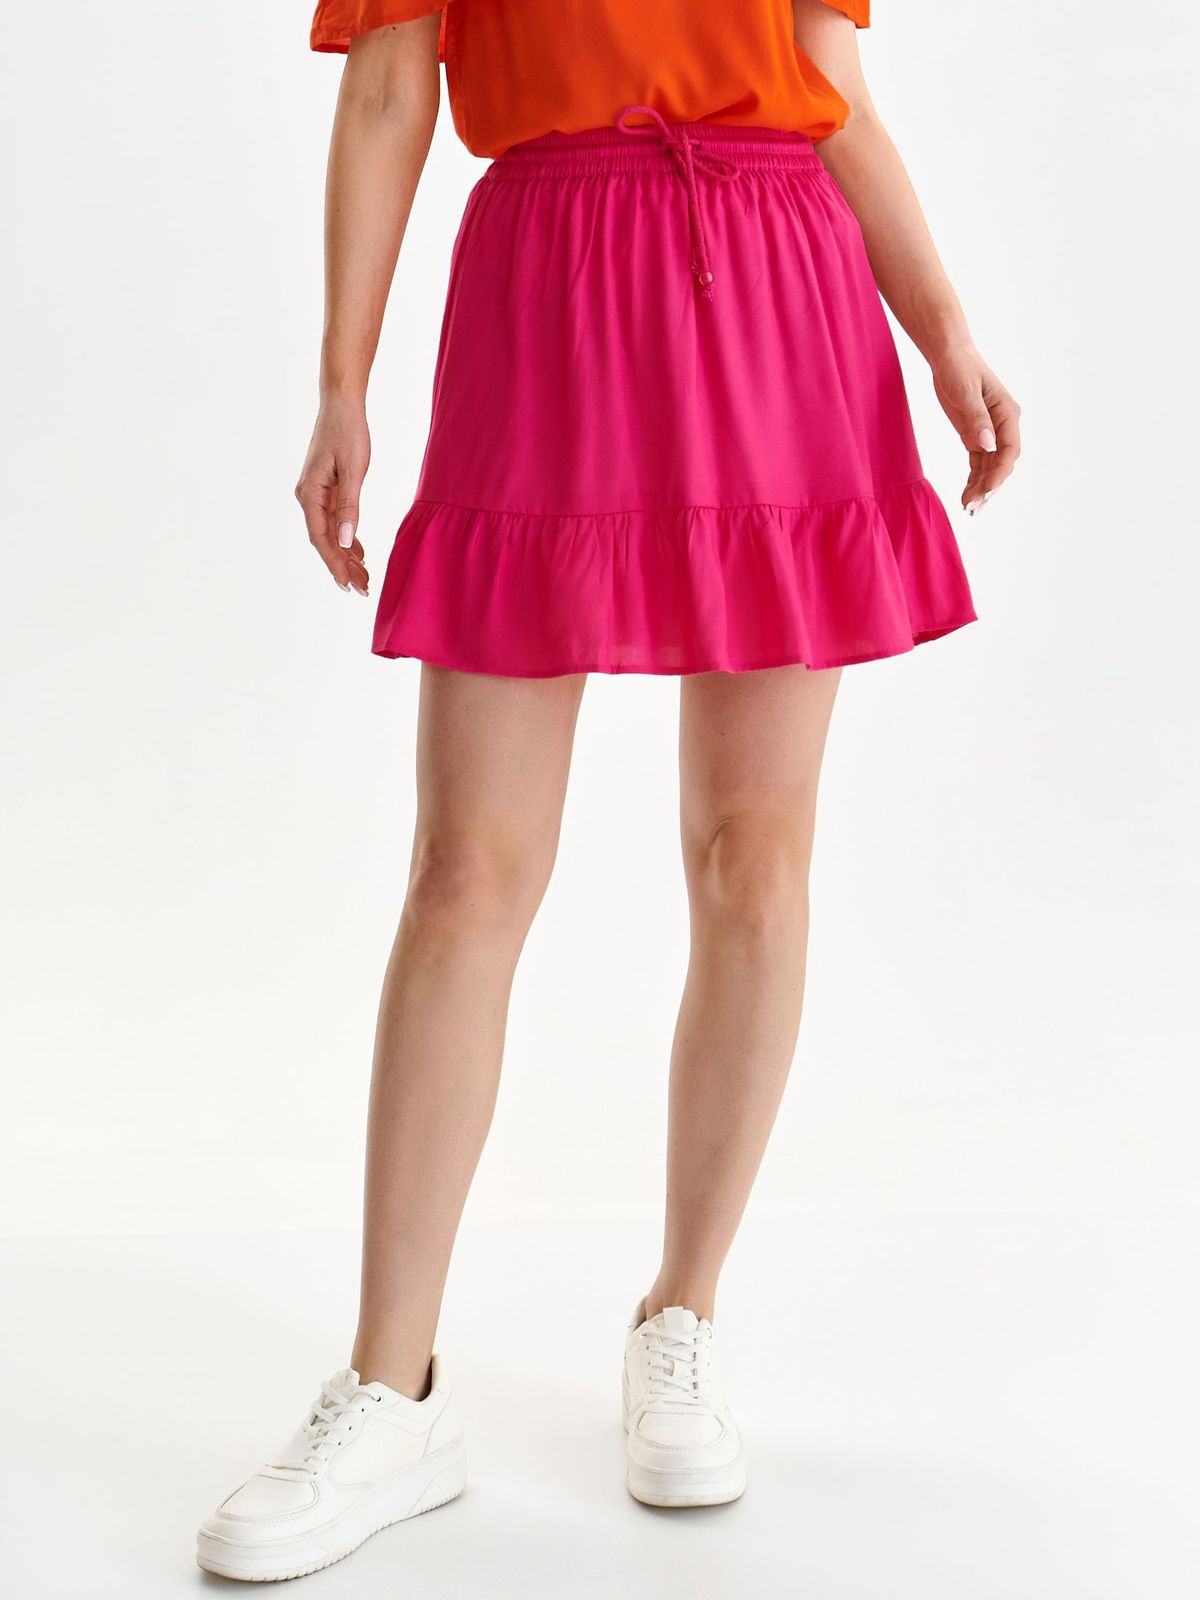 Pink skirt short cut cloche with elastic waist light material is fastened around the waist with a ribbon